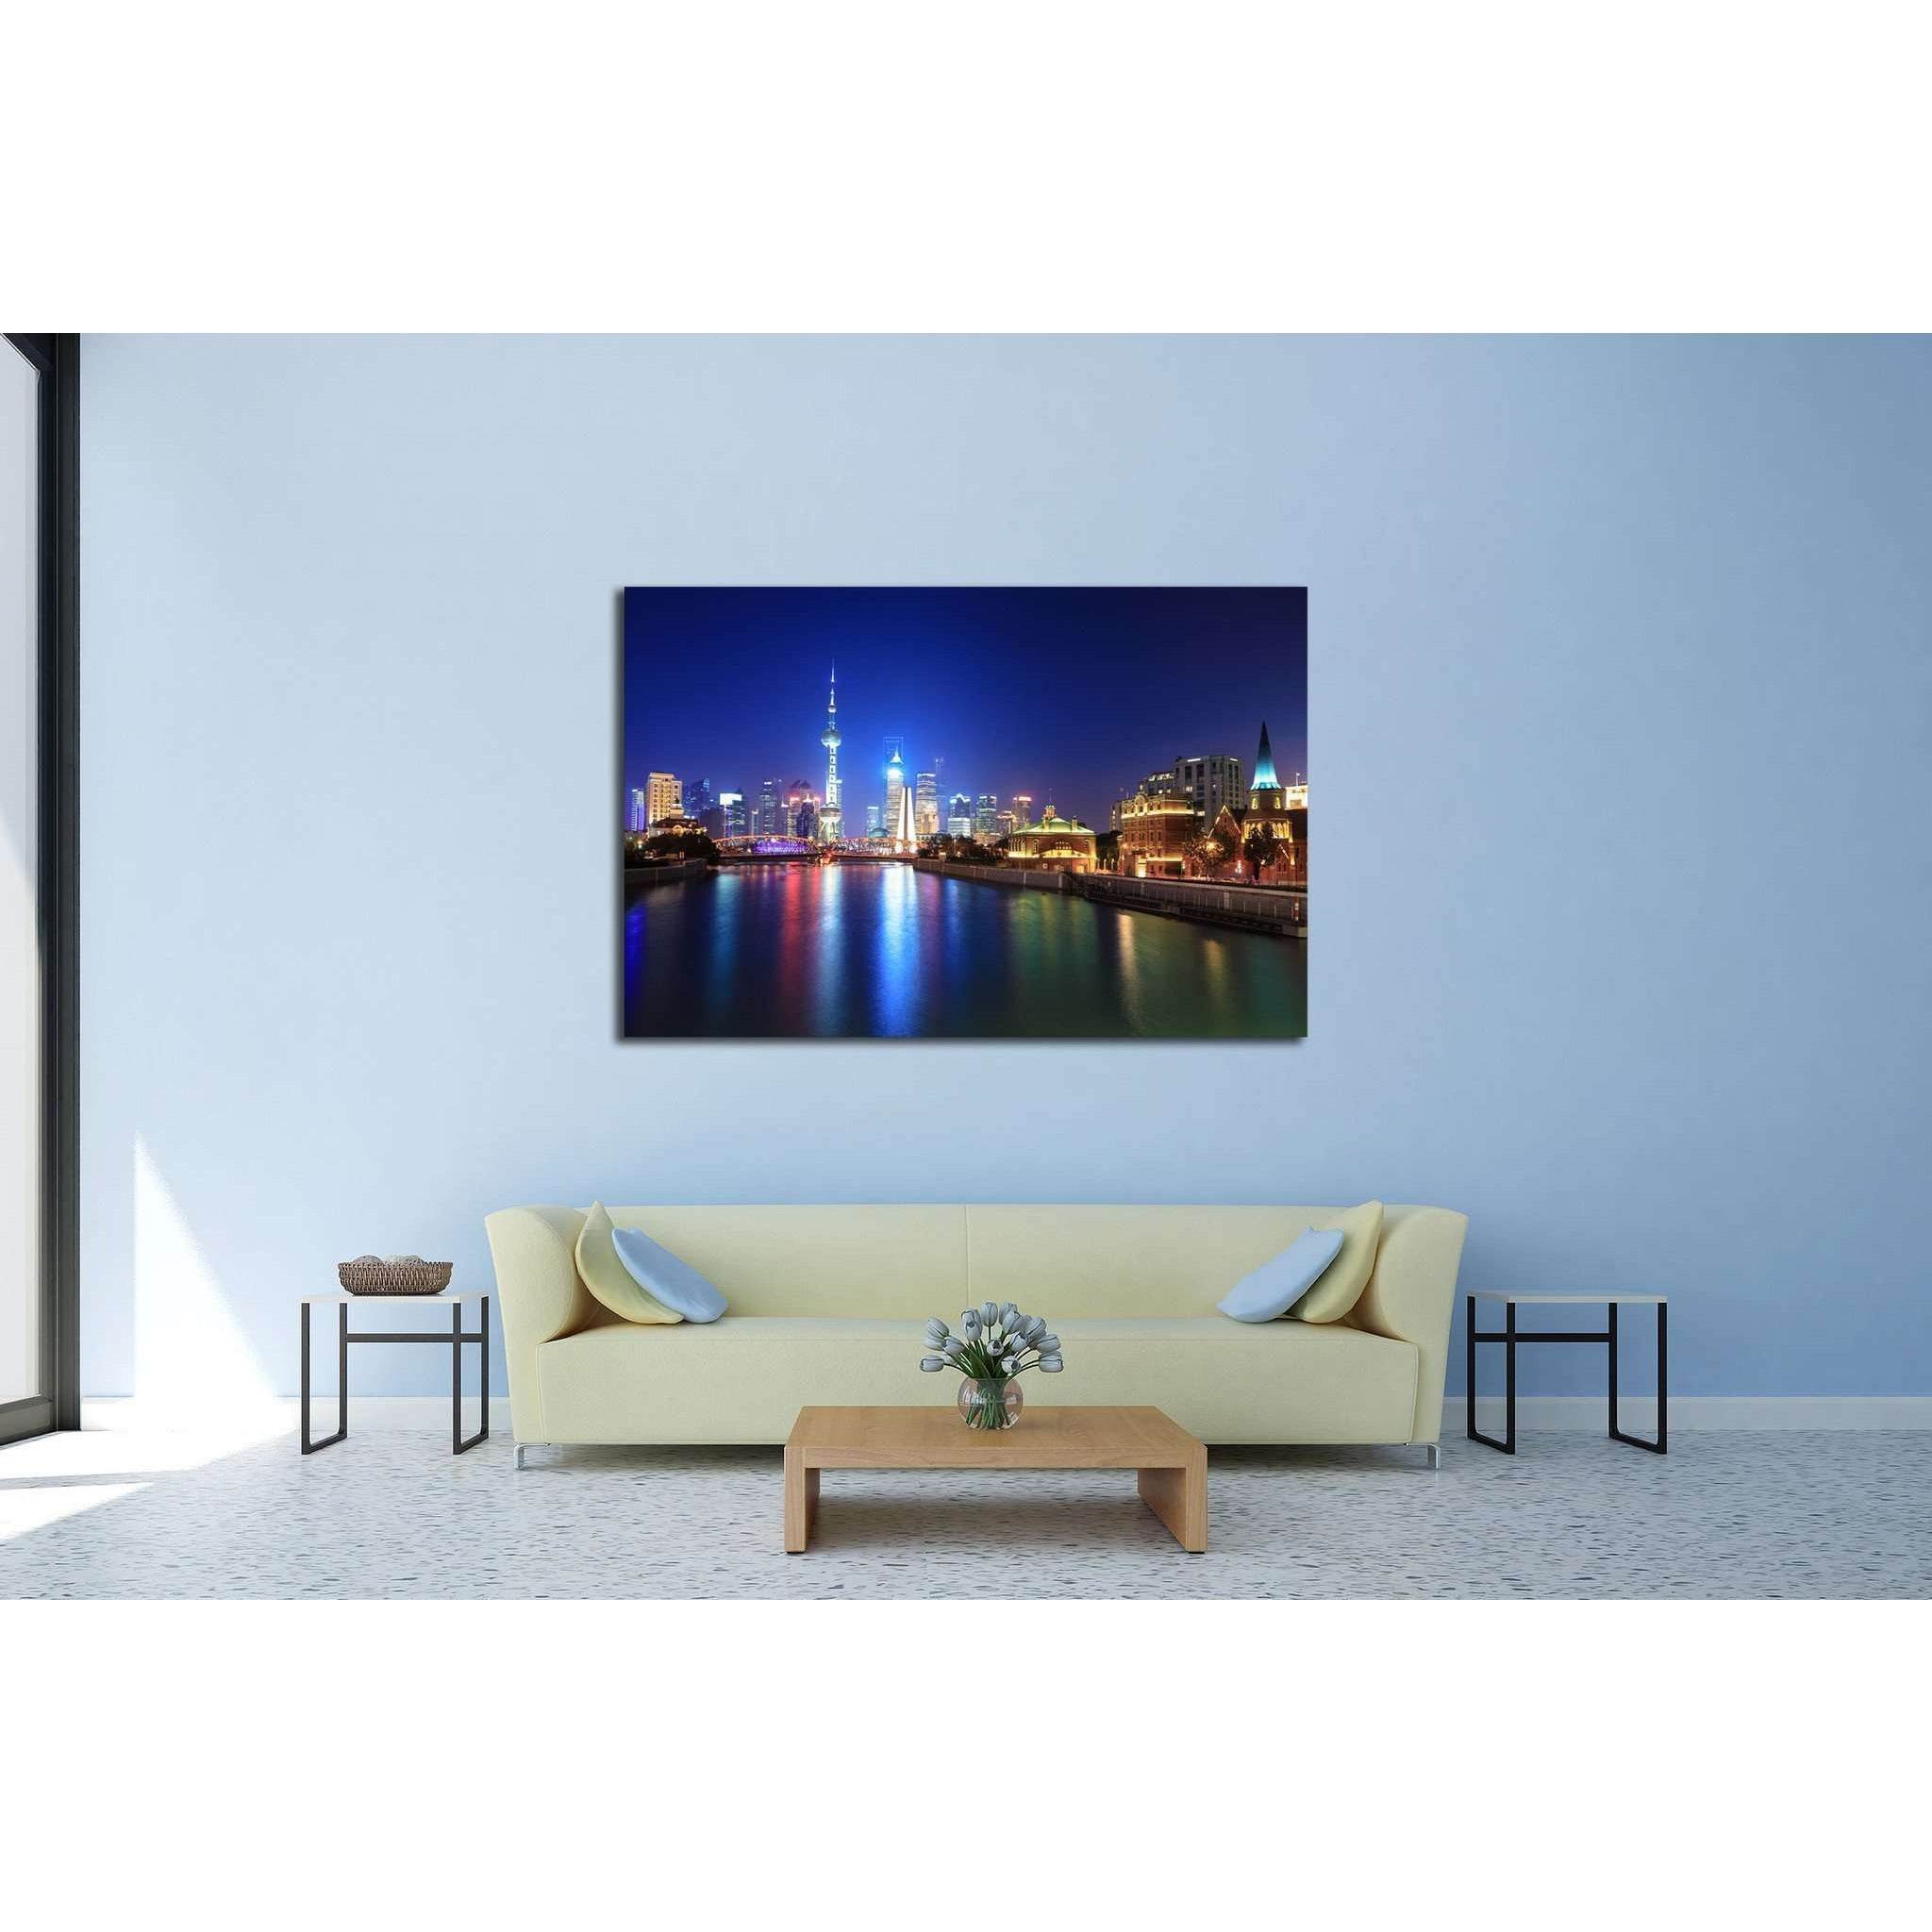 the beauty of shanghai №589 Ready to Hang Canvas Print